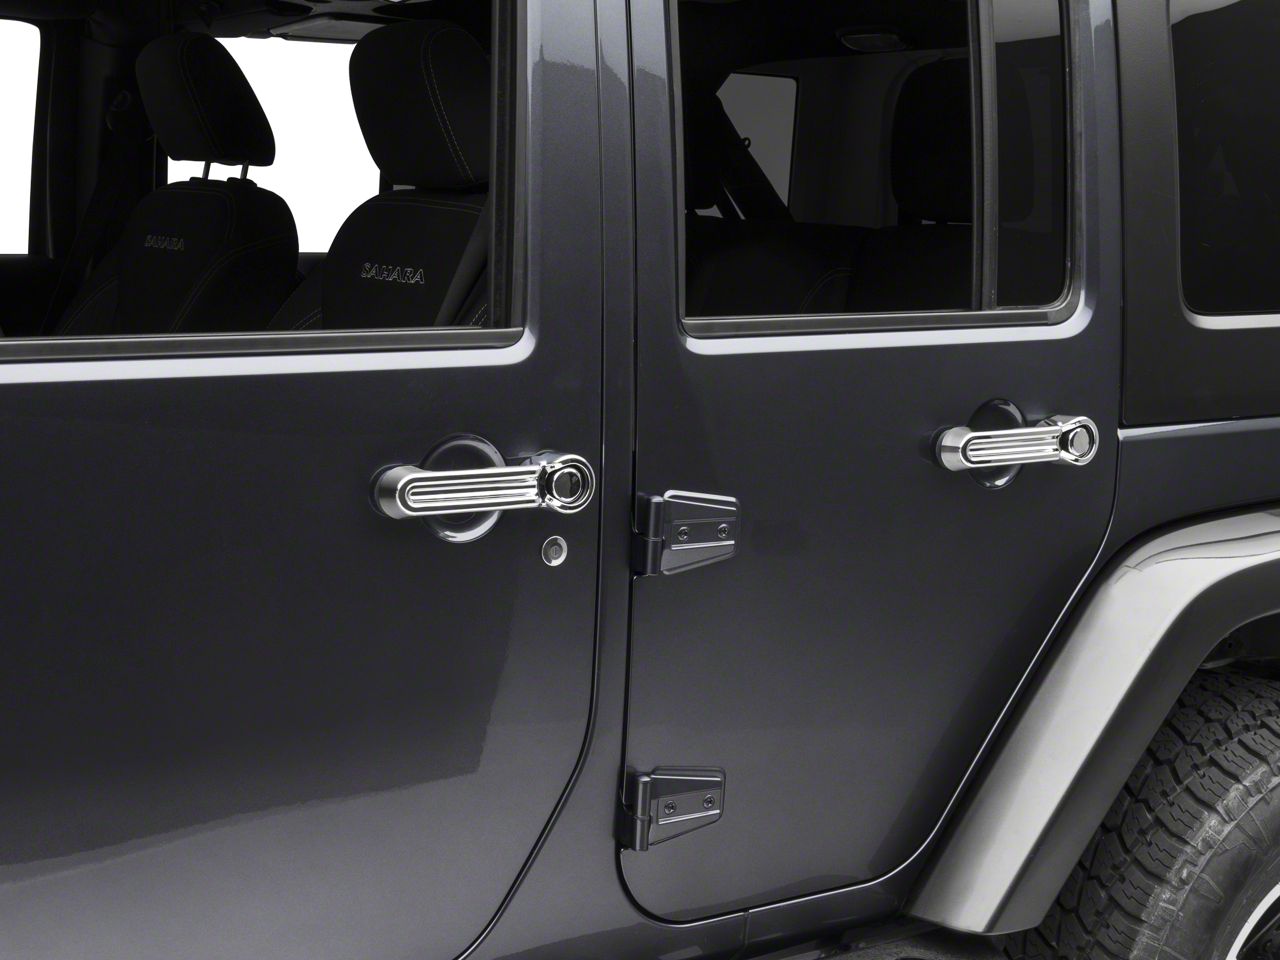 08-12 Jeep Liberty Silver 07-11 Dodge Nitro WZXDAUTO Abs Chrome Planted 5PCS Door Handle Cover Kit and Tailgate Handle Cover for 07-17 Jeep Wrangler JK 